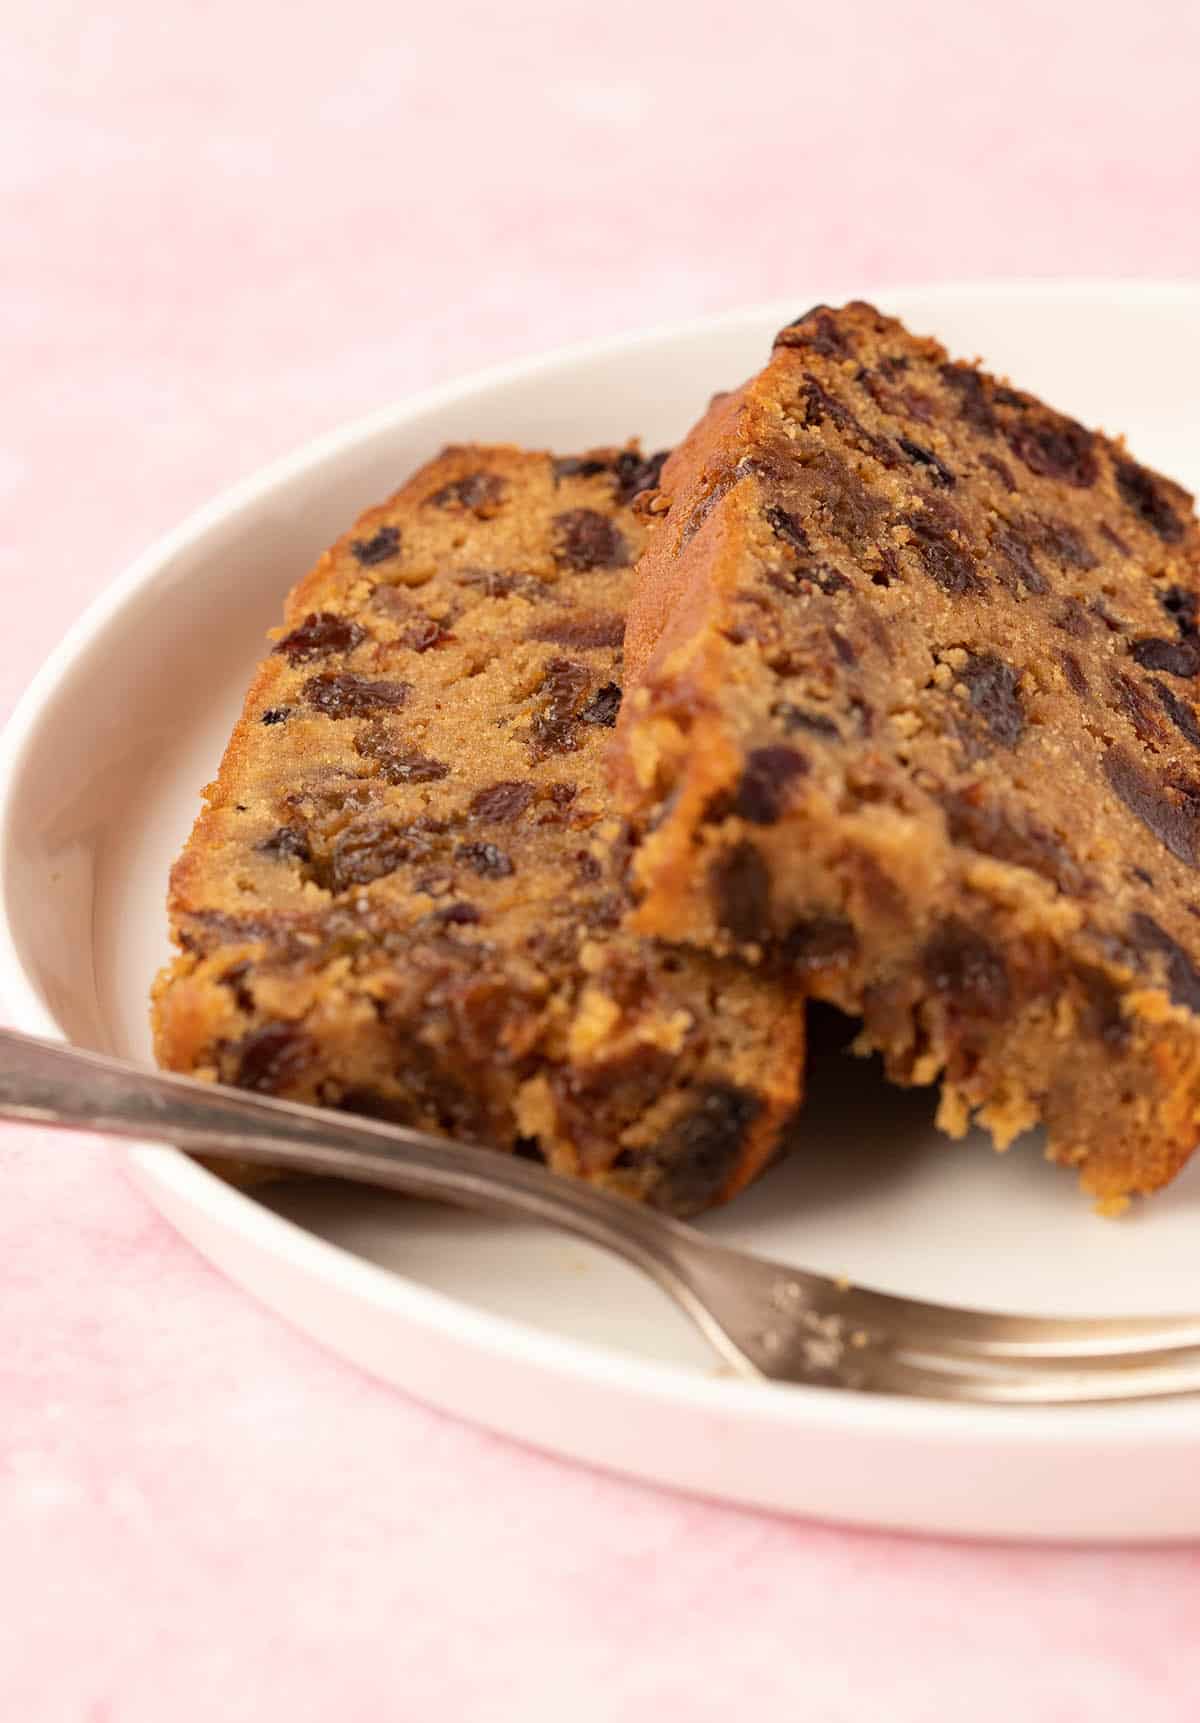 Two slices of Fruit Cake on a white plate with a small fork.